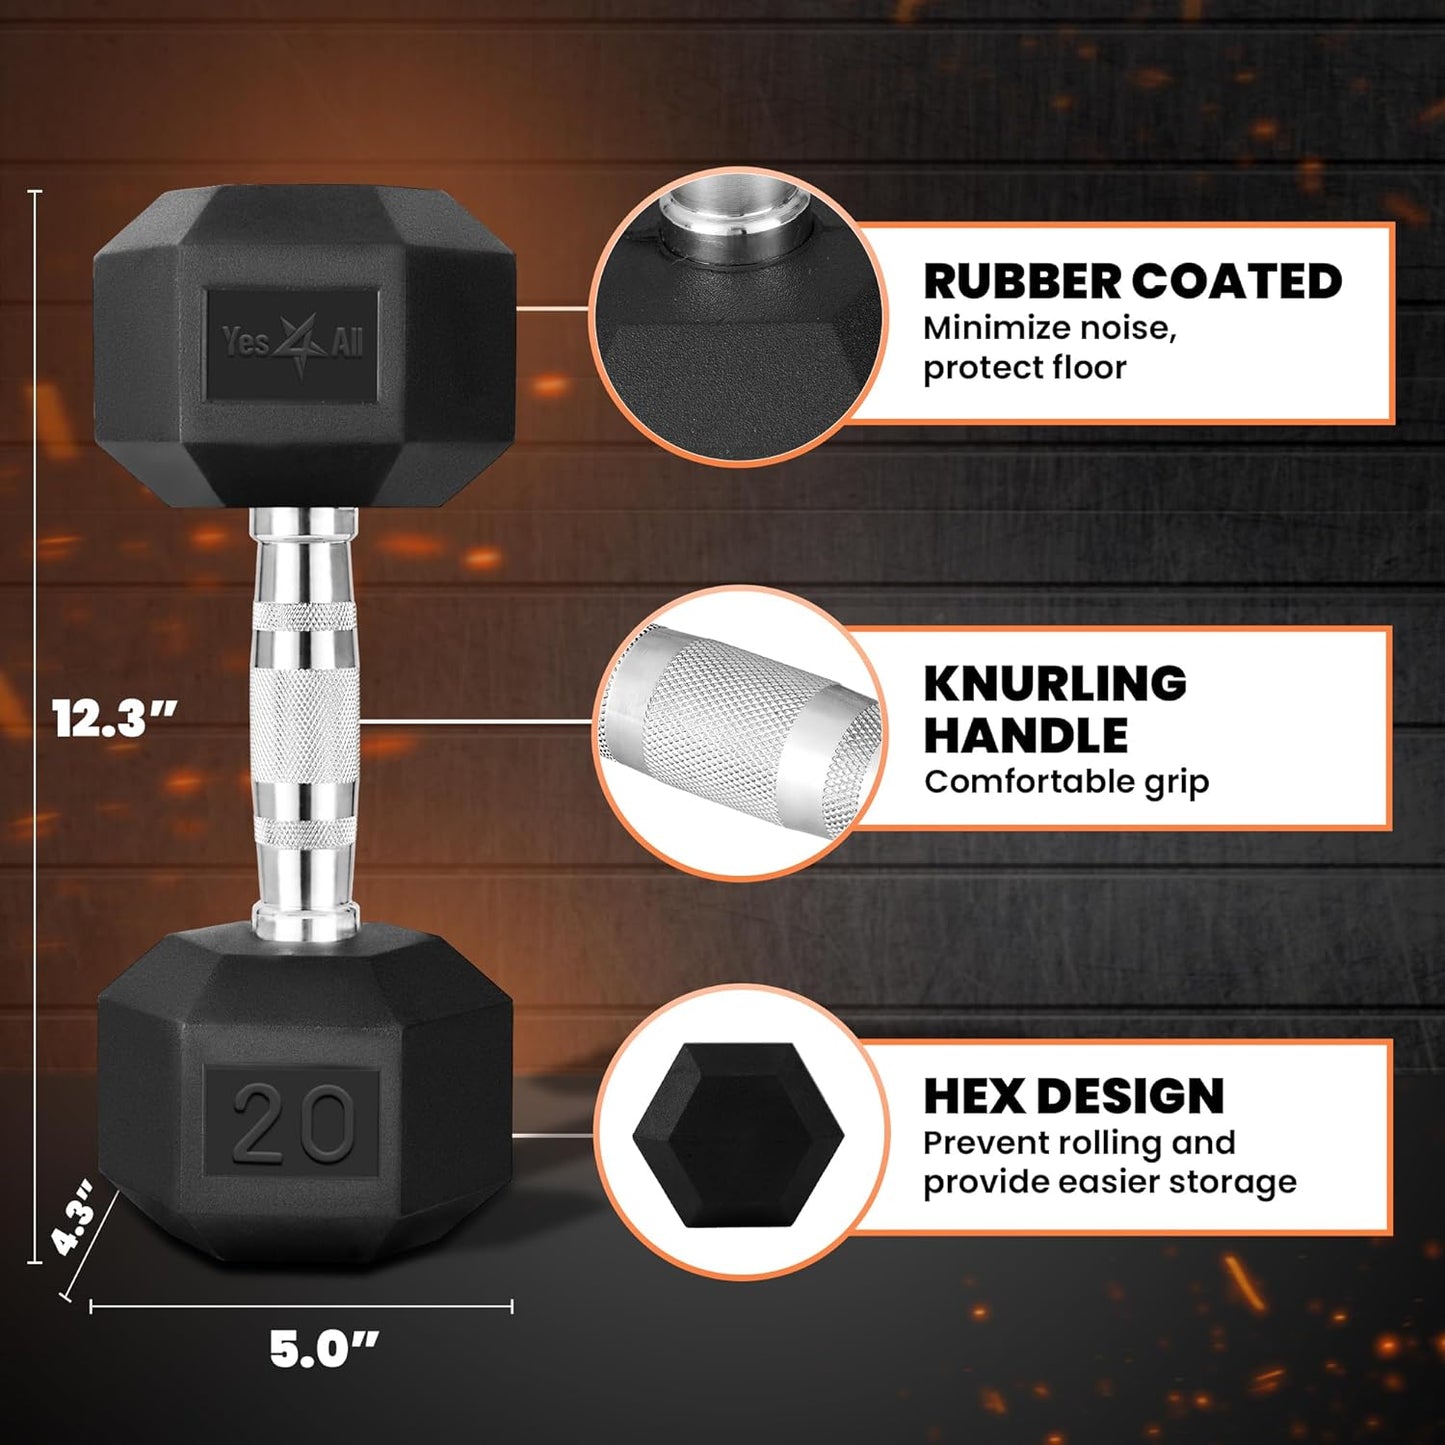 Yes4All Chrome Grip Encased Hex Dumbbells \u2013 Hand Weights With Anti-Slip 10-30 LBS Pair